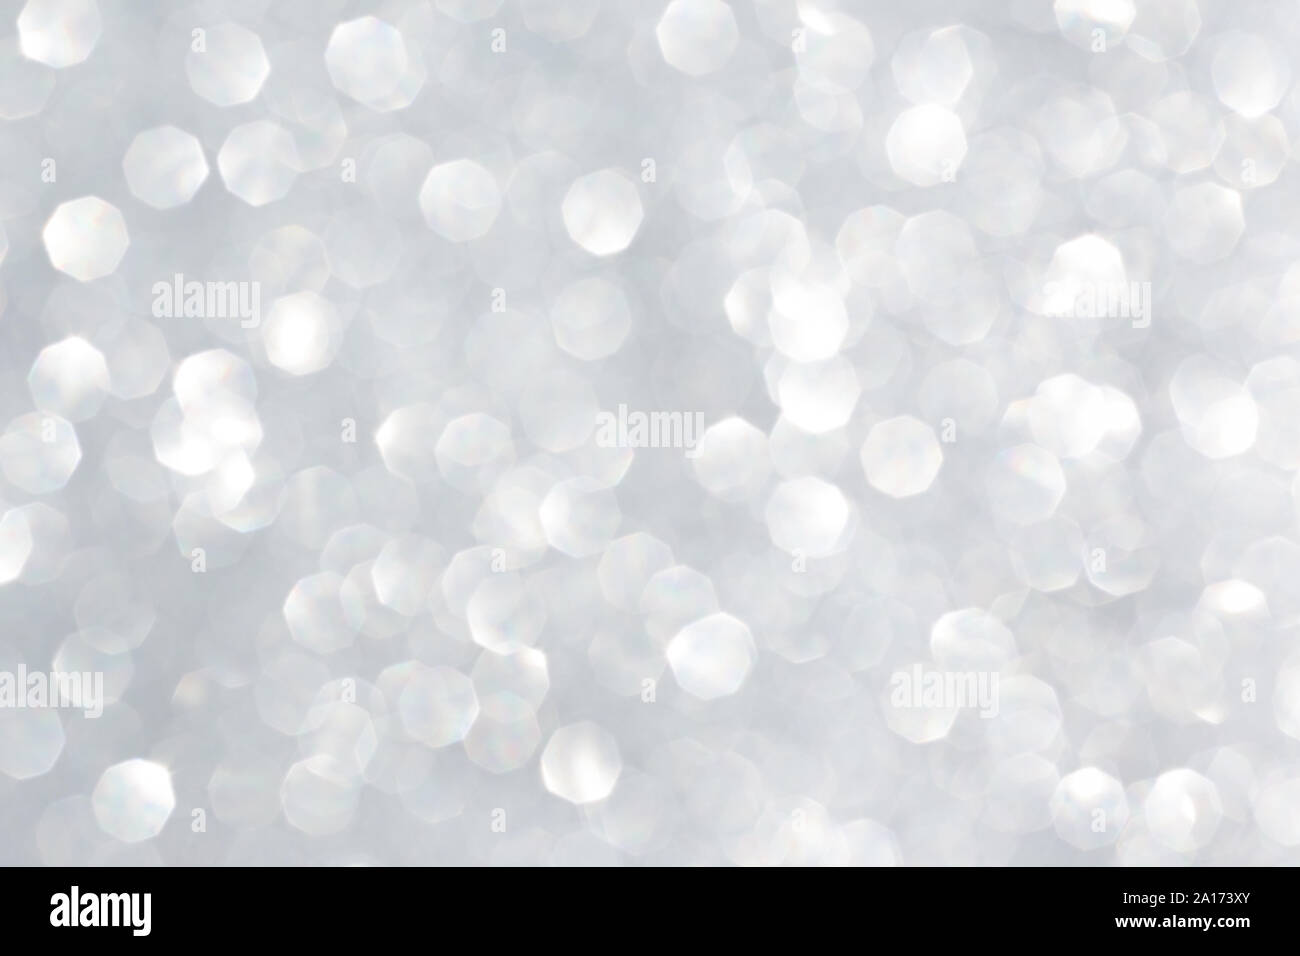 Silver glitter background Stock Photo by ©mjth 79462084